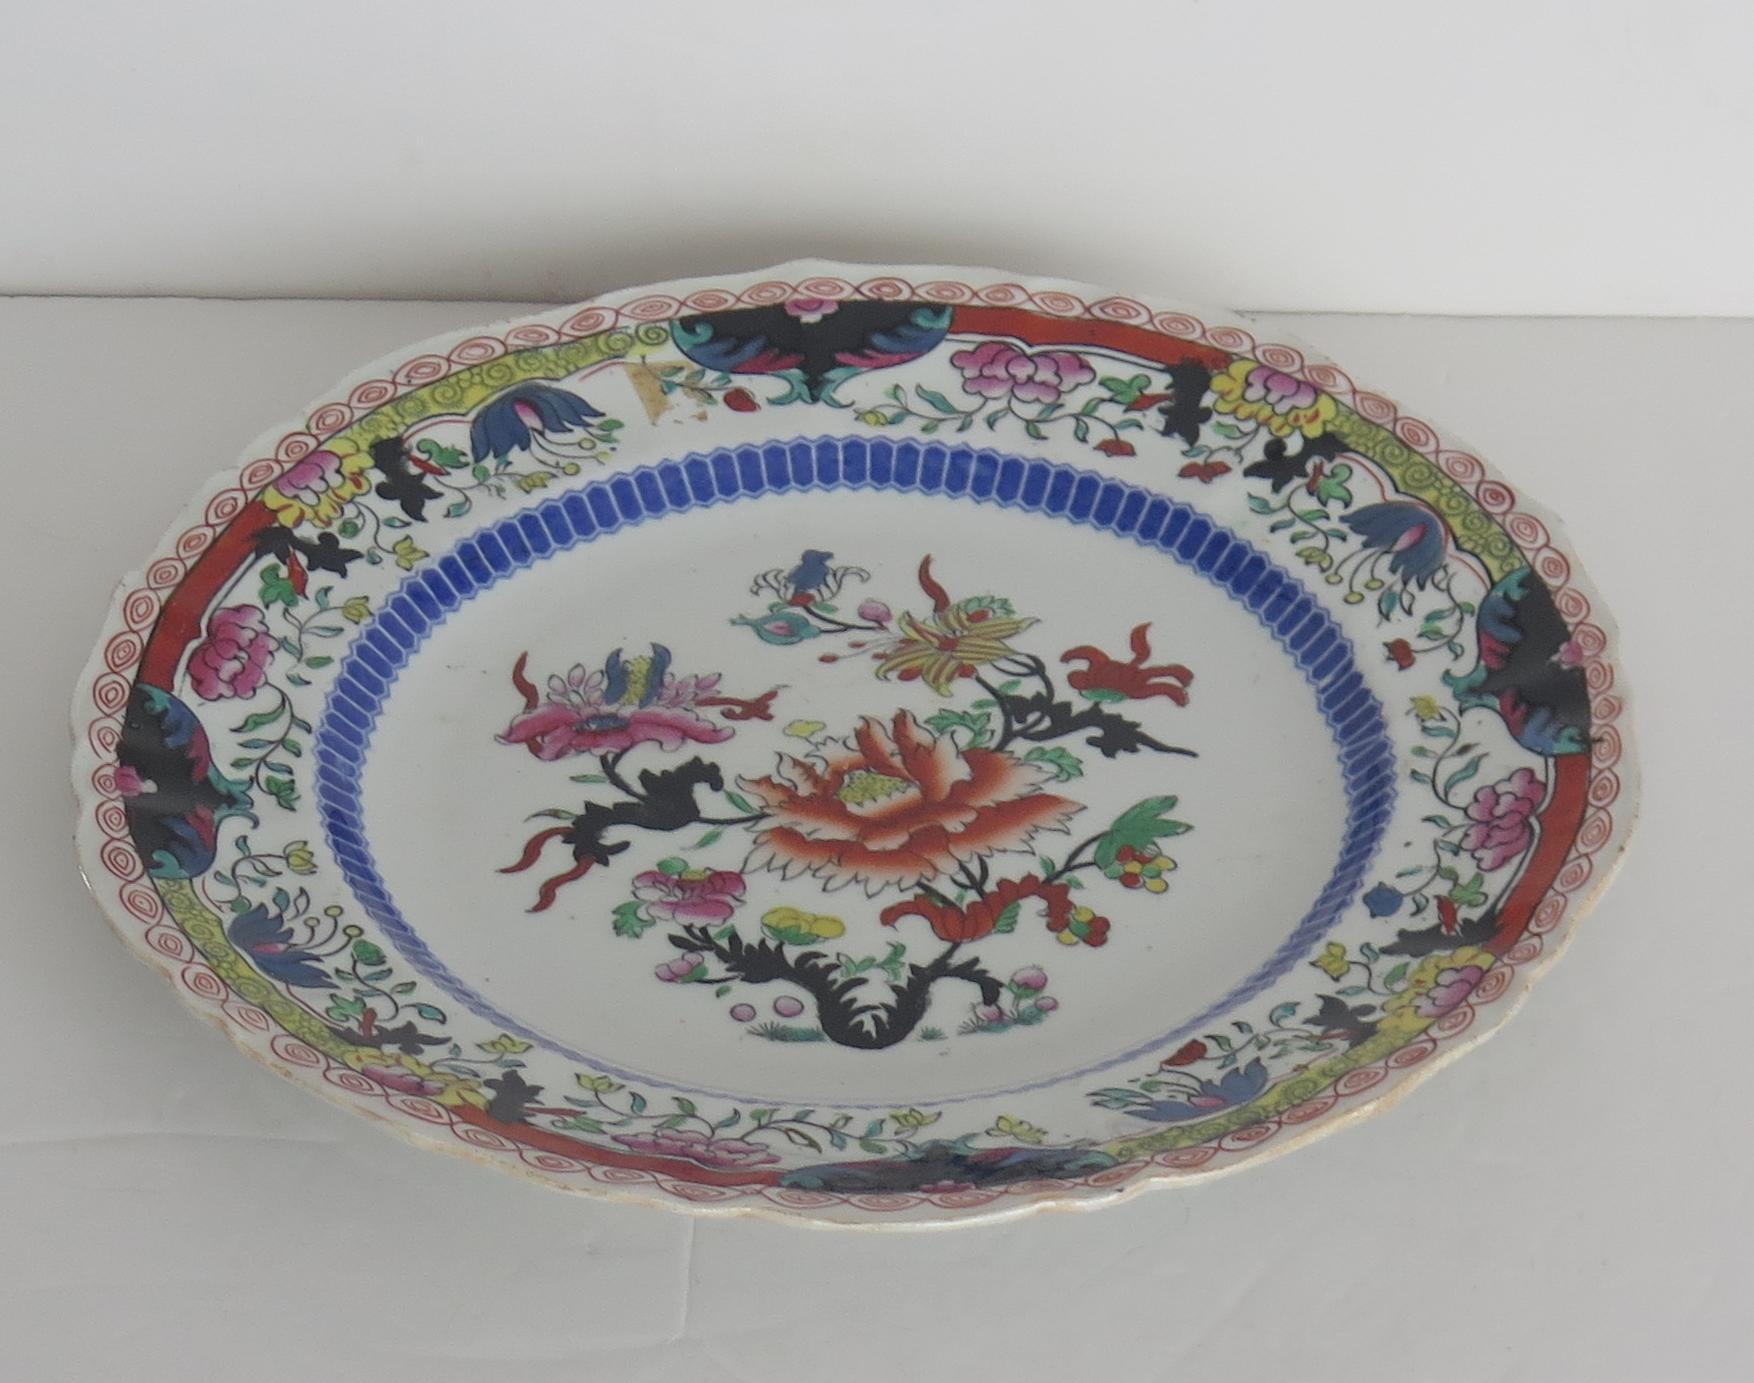 Hand-Painted Early 19th Century Masons Ironstone Plate in Ragged Rose Pattern, Circa 1830